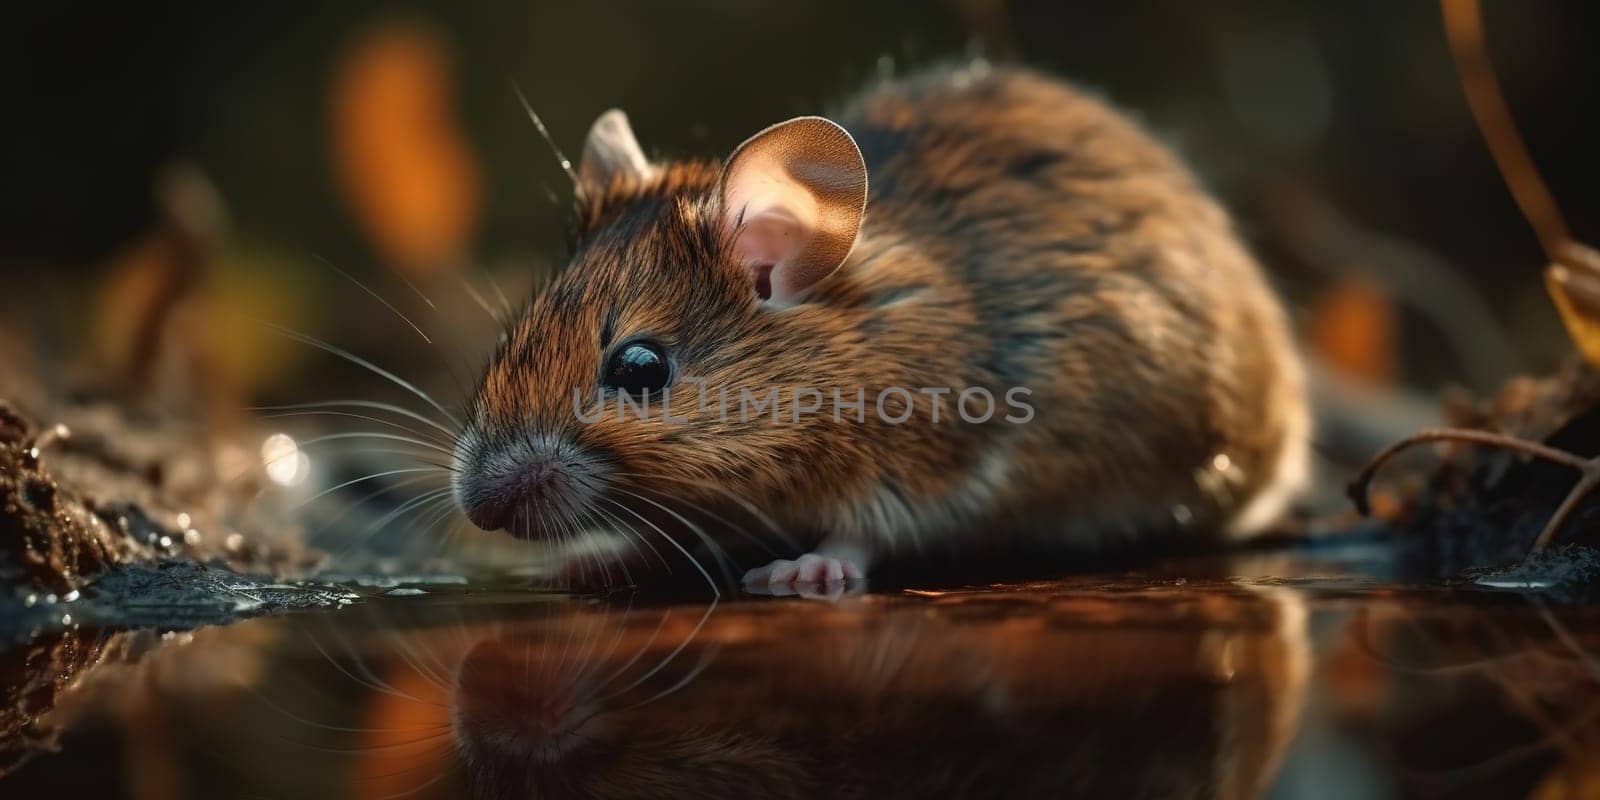 Grey Mouse Over Puddle Of Water In Autumn Forest, Animal In Natural Habitat